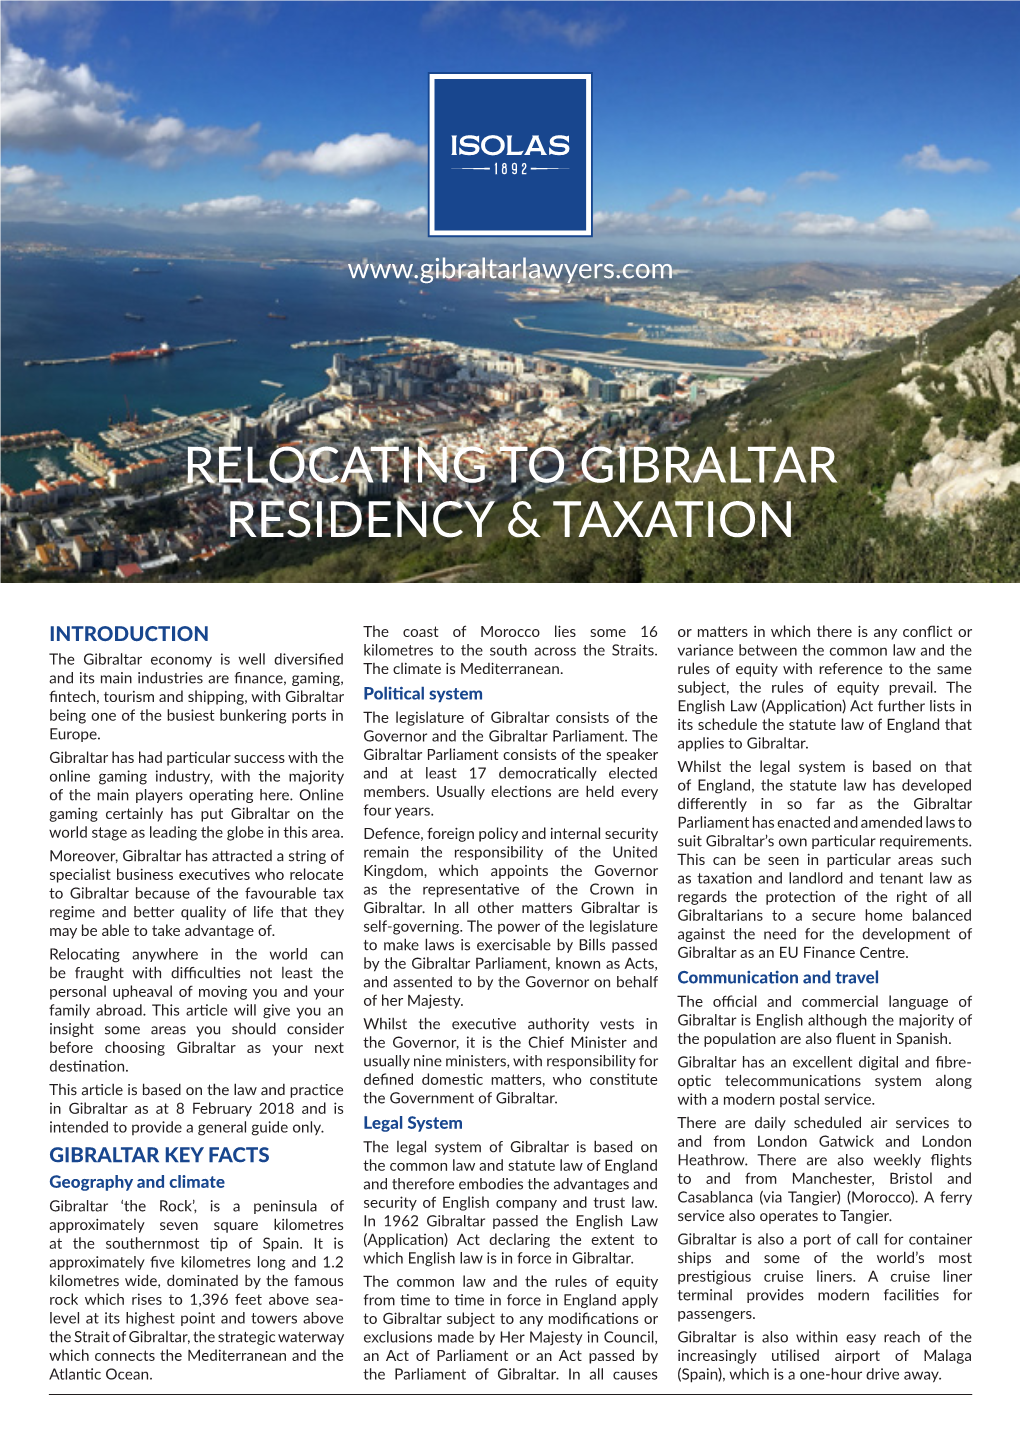 Relocating to Gibraltar Residency & Taxation